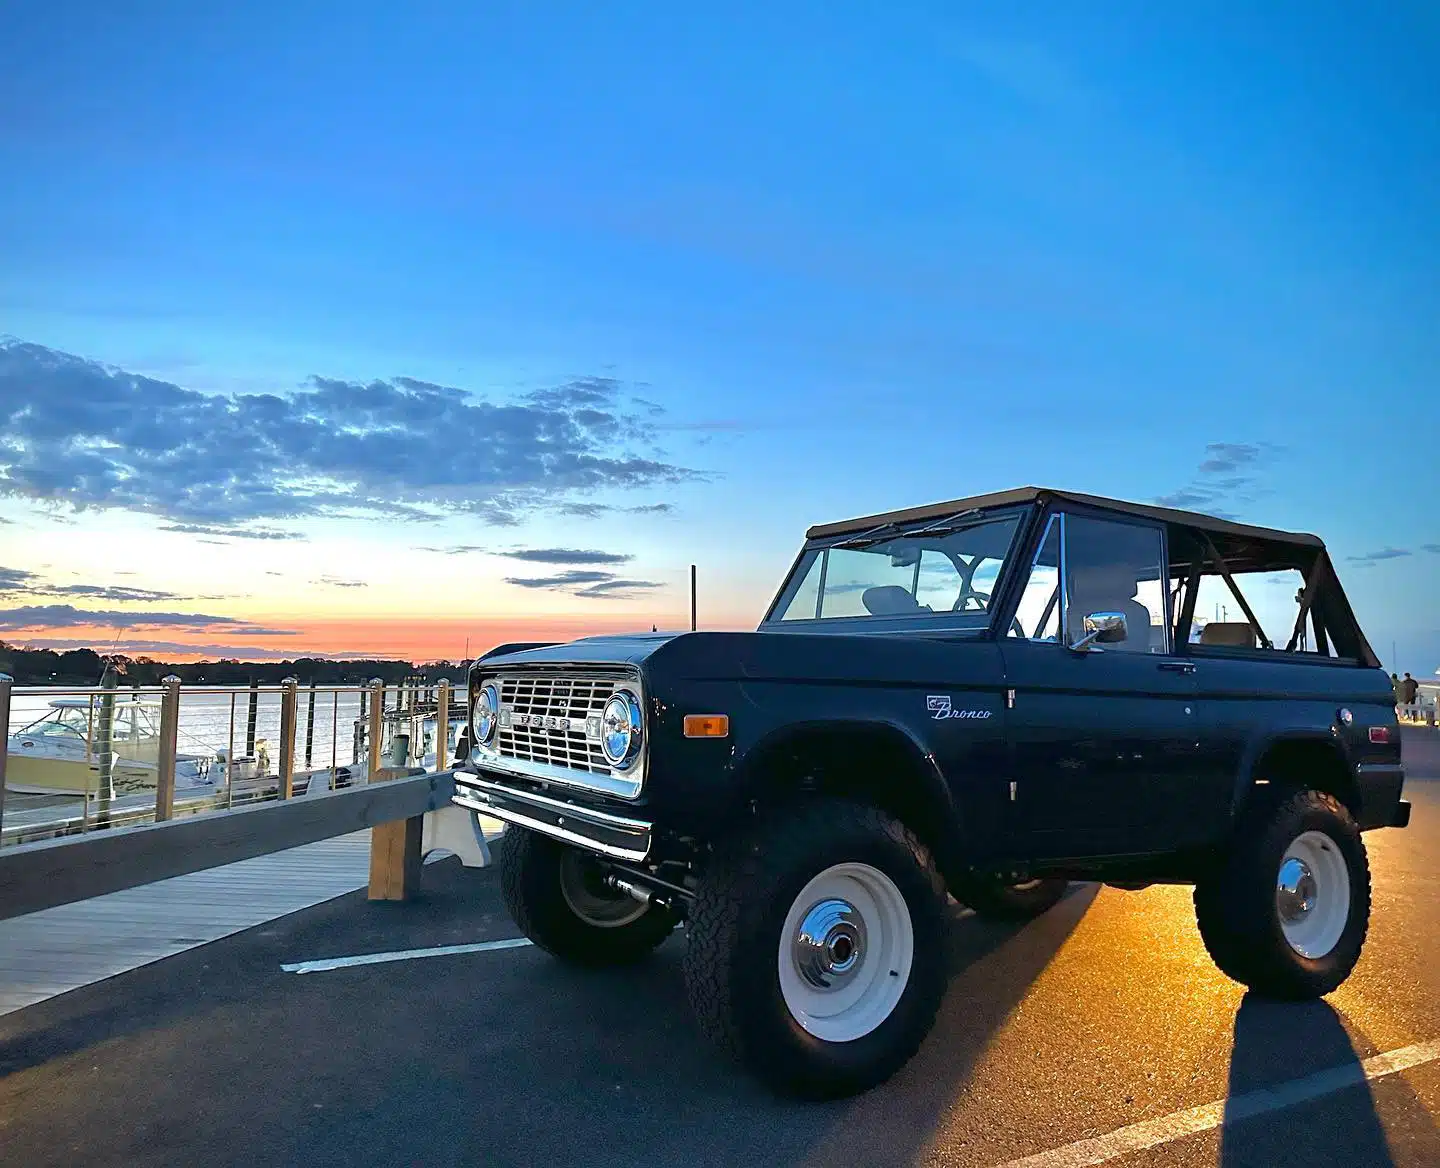 A first generation Ford Bronco with a powerful engine and transmission